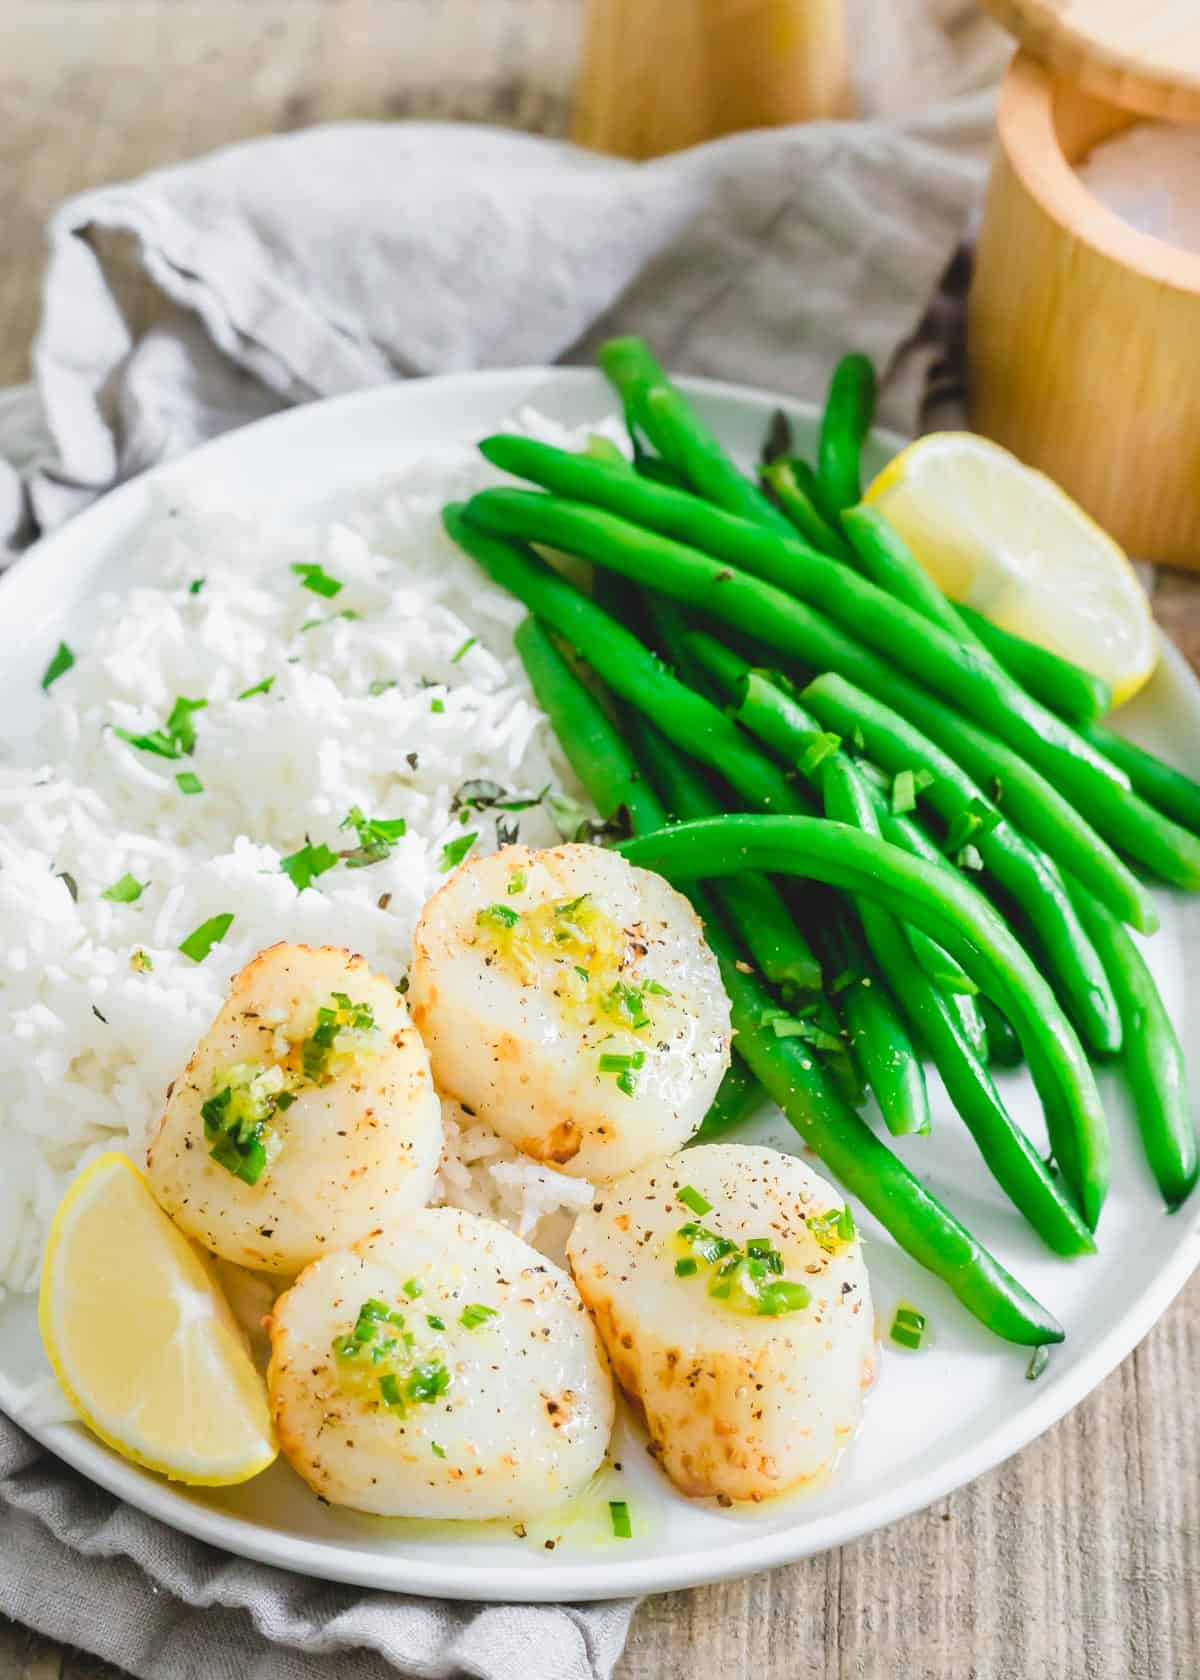 Perfectly cooked air fryer scallops with a chive garlic lemon butter sauce on a plate.